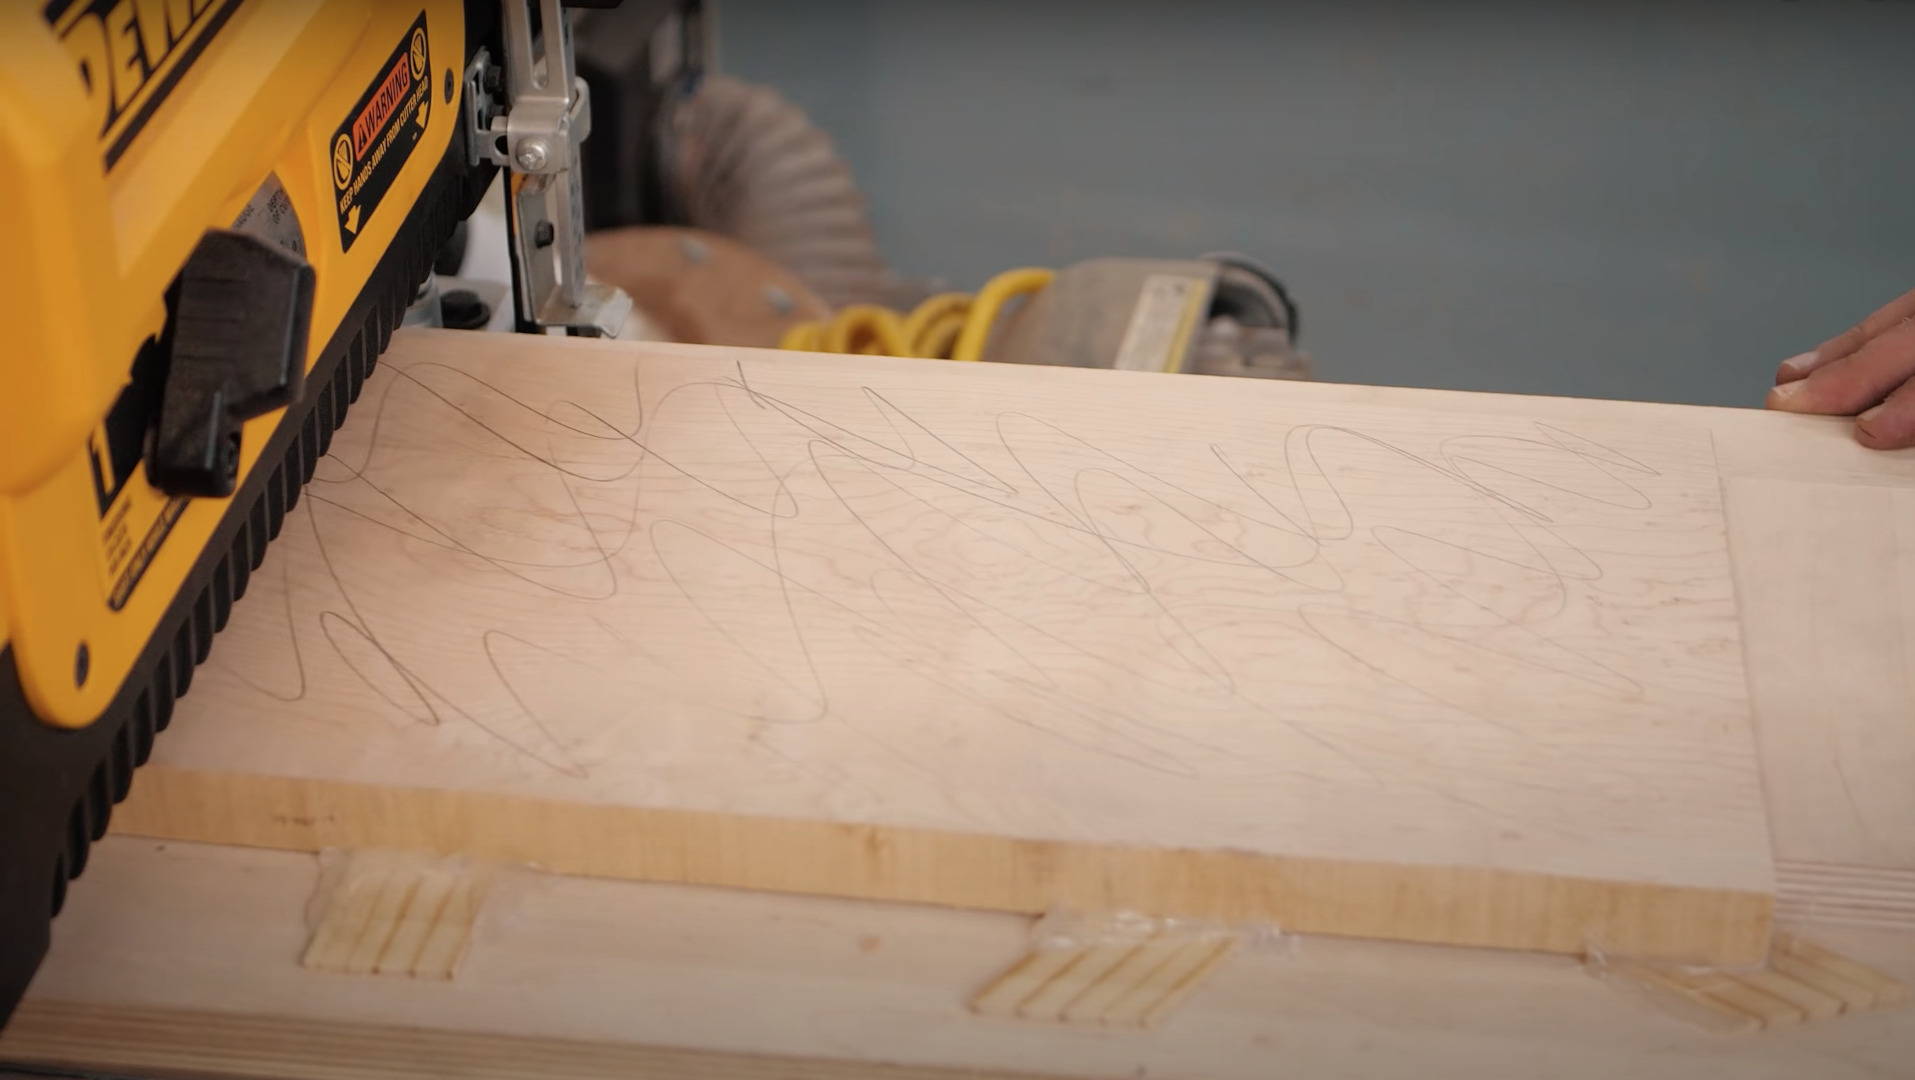 Jointing a board with a planer jig